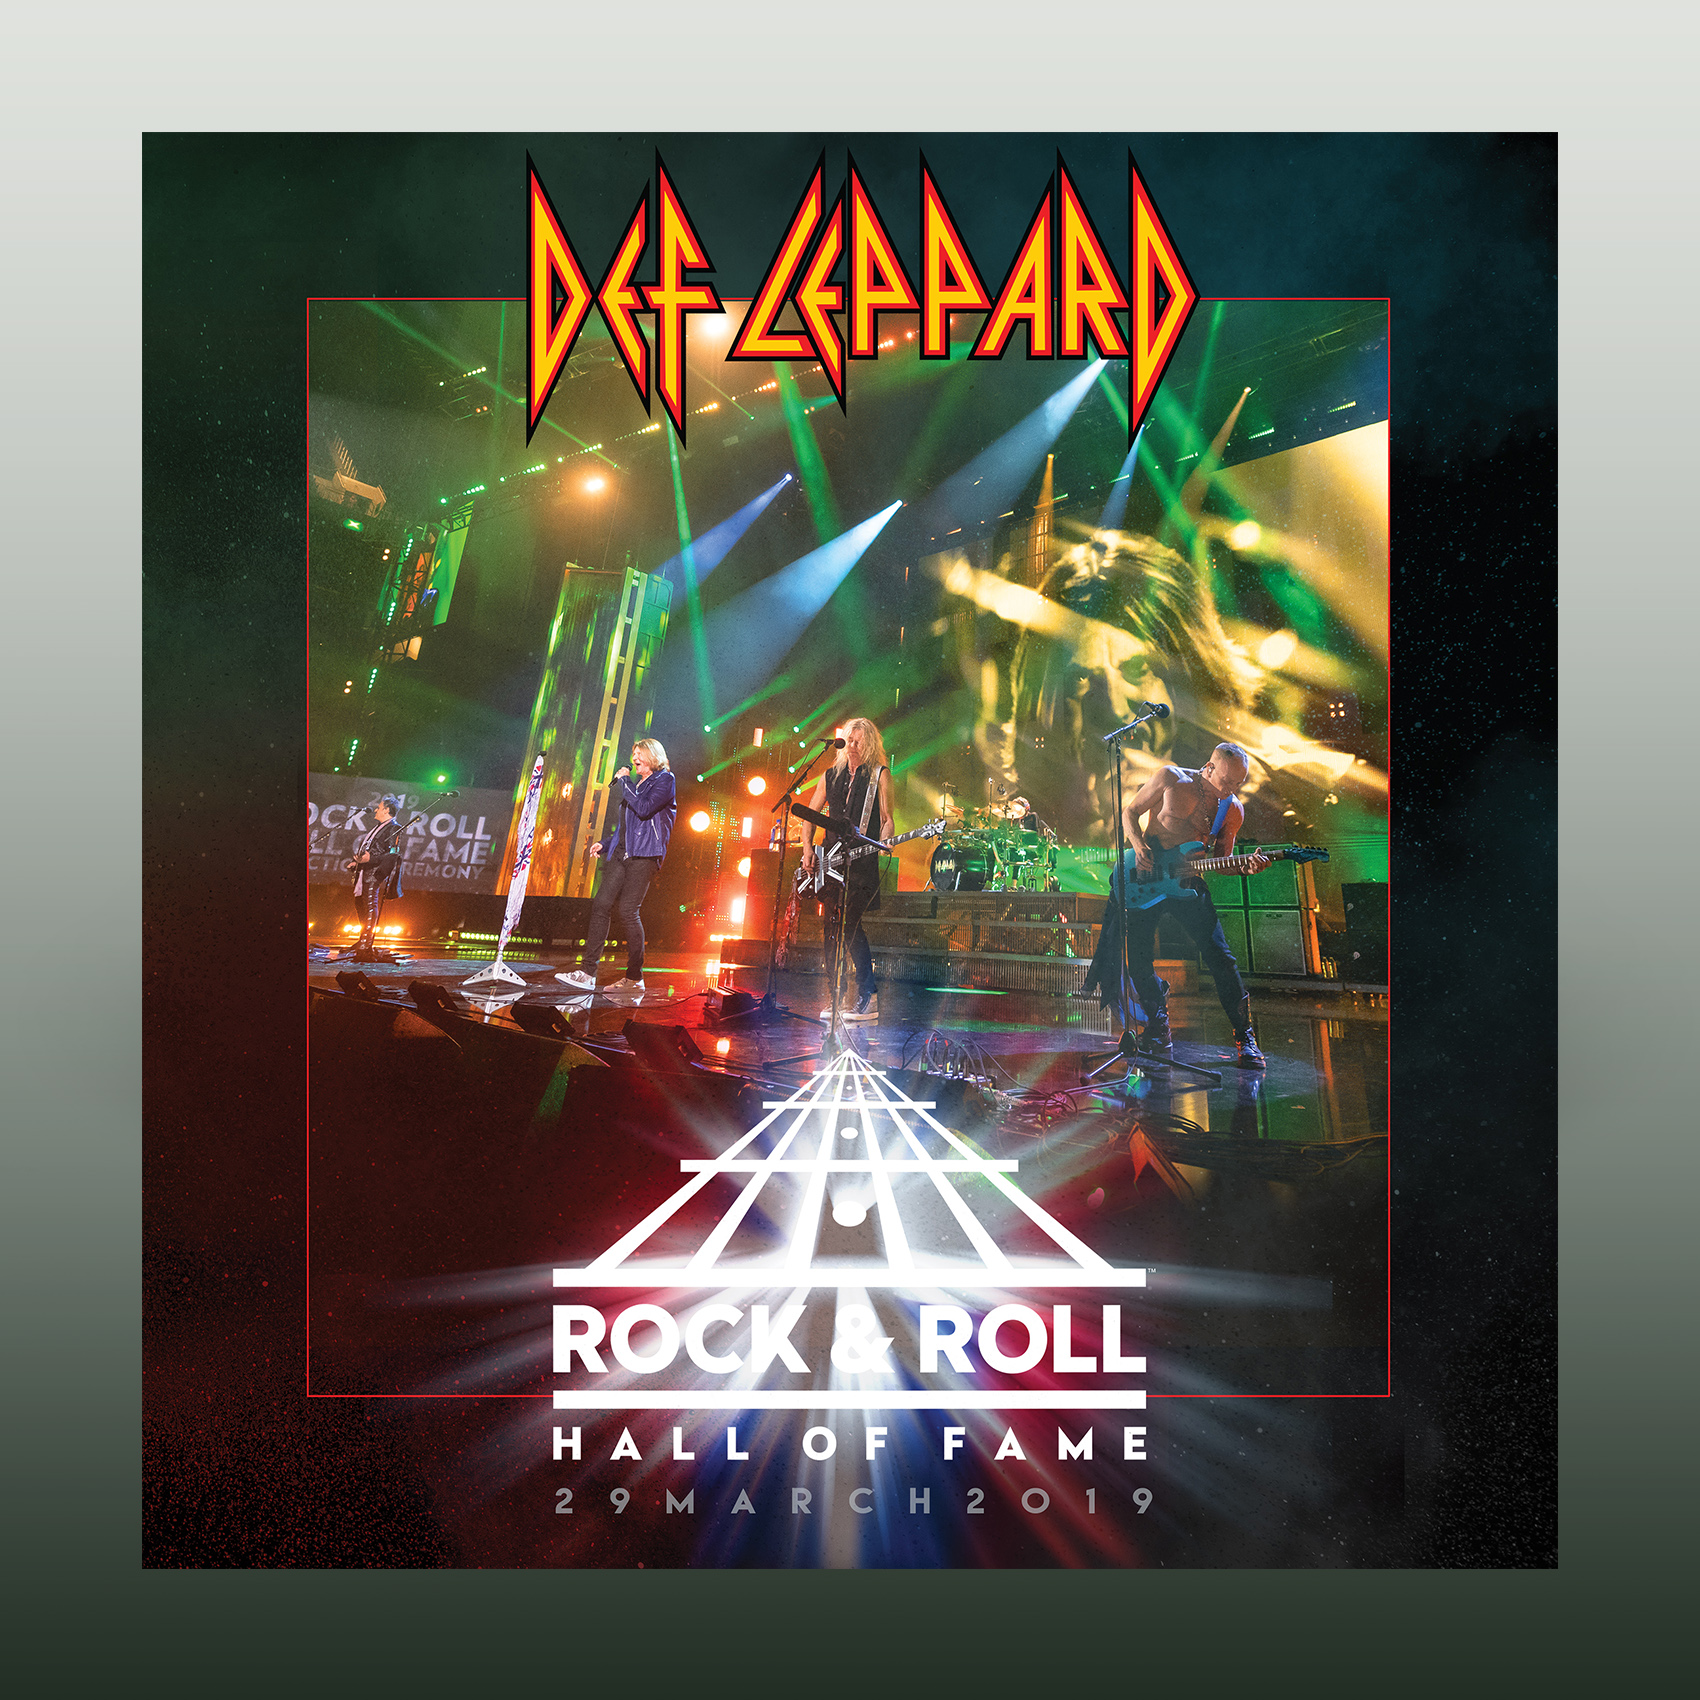 Rock N Roll Hall of Fame - Record Store Day | Def Leppard